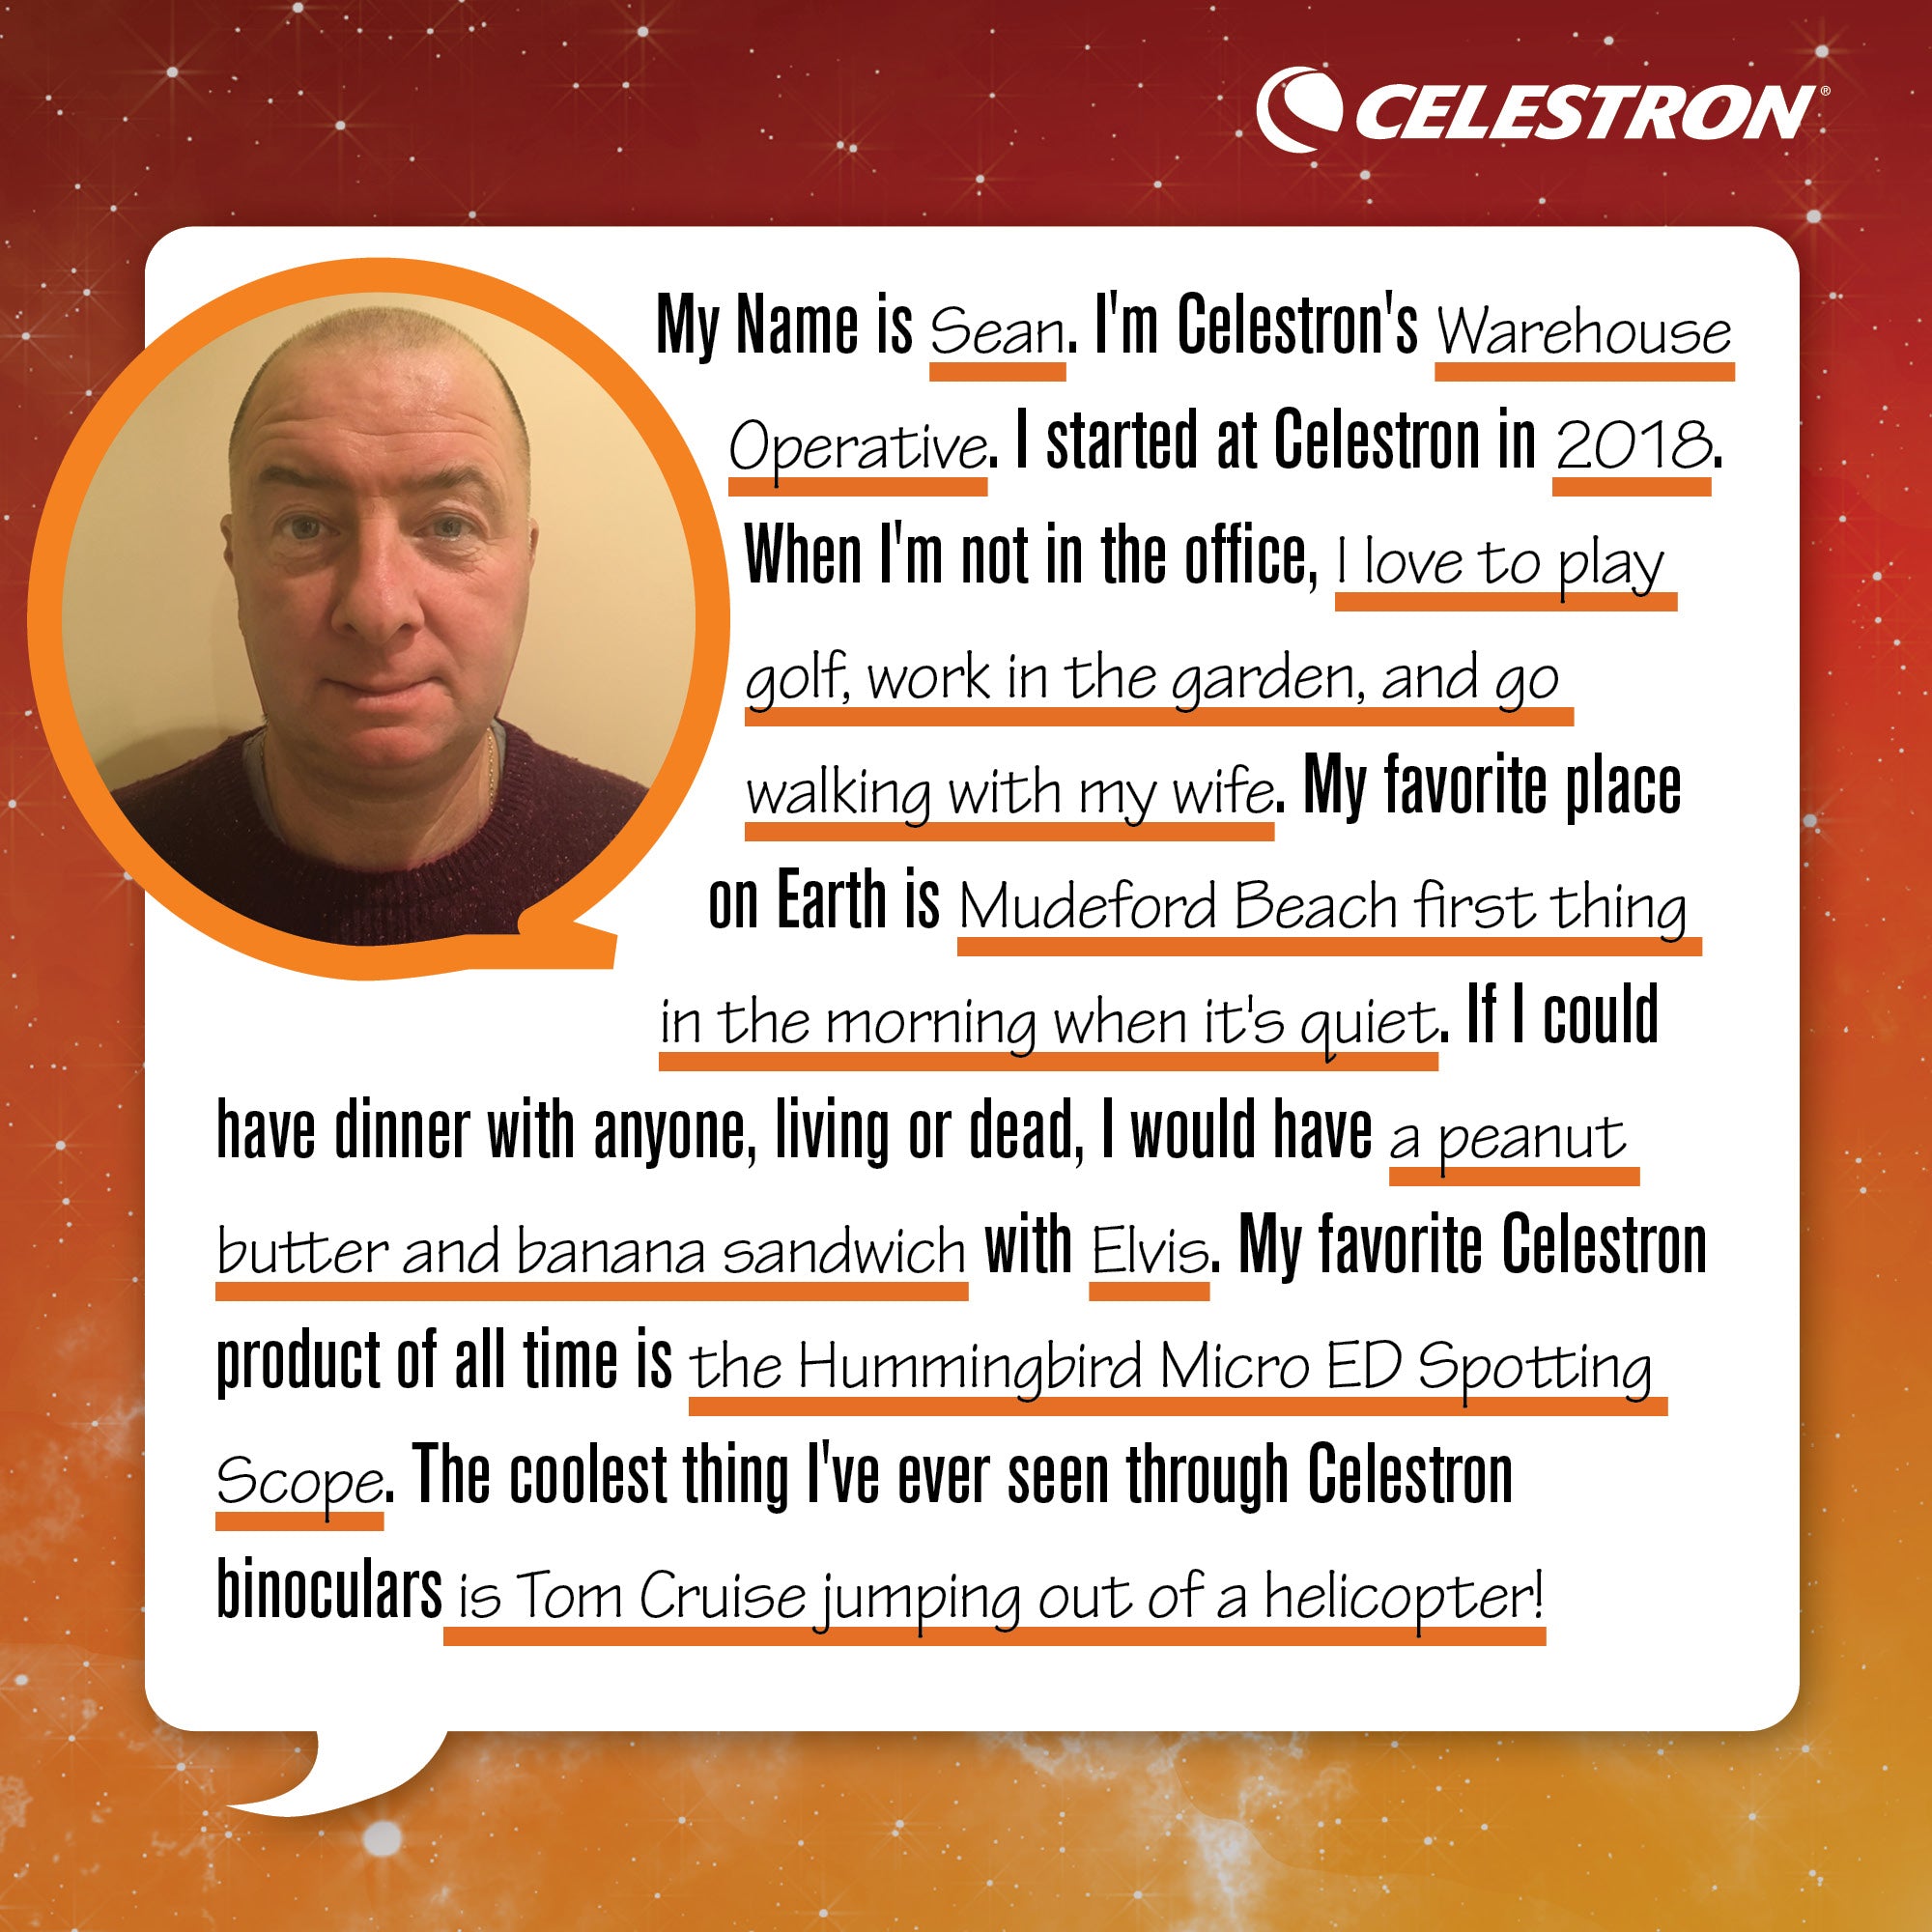 My name is Sean. I'm a Celestron's Warehouse Operative. I started at Celestron in 2018. When I'm not in the office, I love to play golf, work in the garden, and go walking with my wife. My favorite place on Earth is Mudeford Beach first thing in the morning when it's quiet. If I could have dinner with anyone, living or dead, I would have a peanut butter banana sandwich with Elvis. My favorite Celestron product of all time is the Hummingbird Micro ED Spotting Scope. The coolest thing I've ever seen through a Celestron binocular is Tom Cruise jumping out of helicopter!